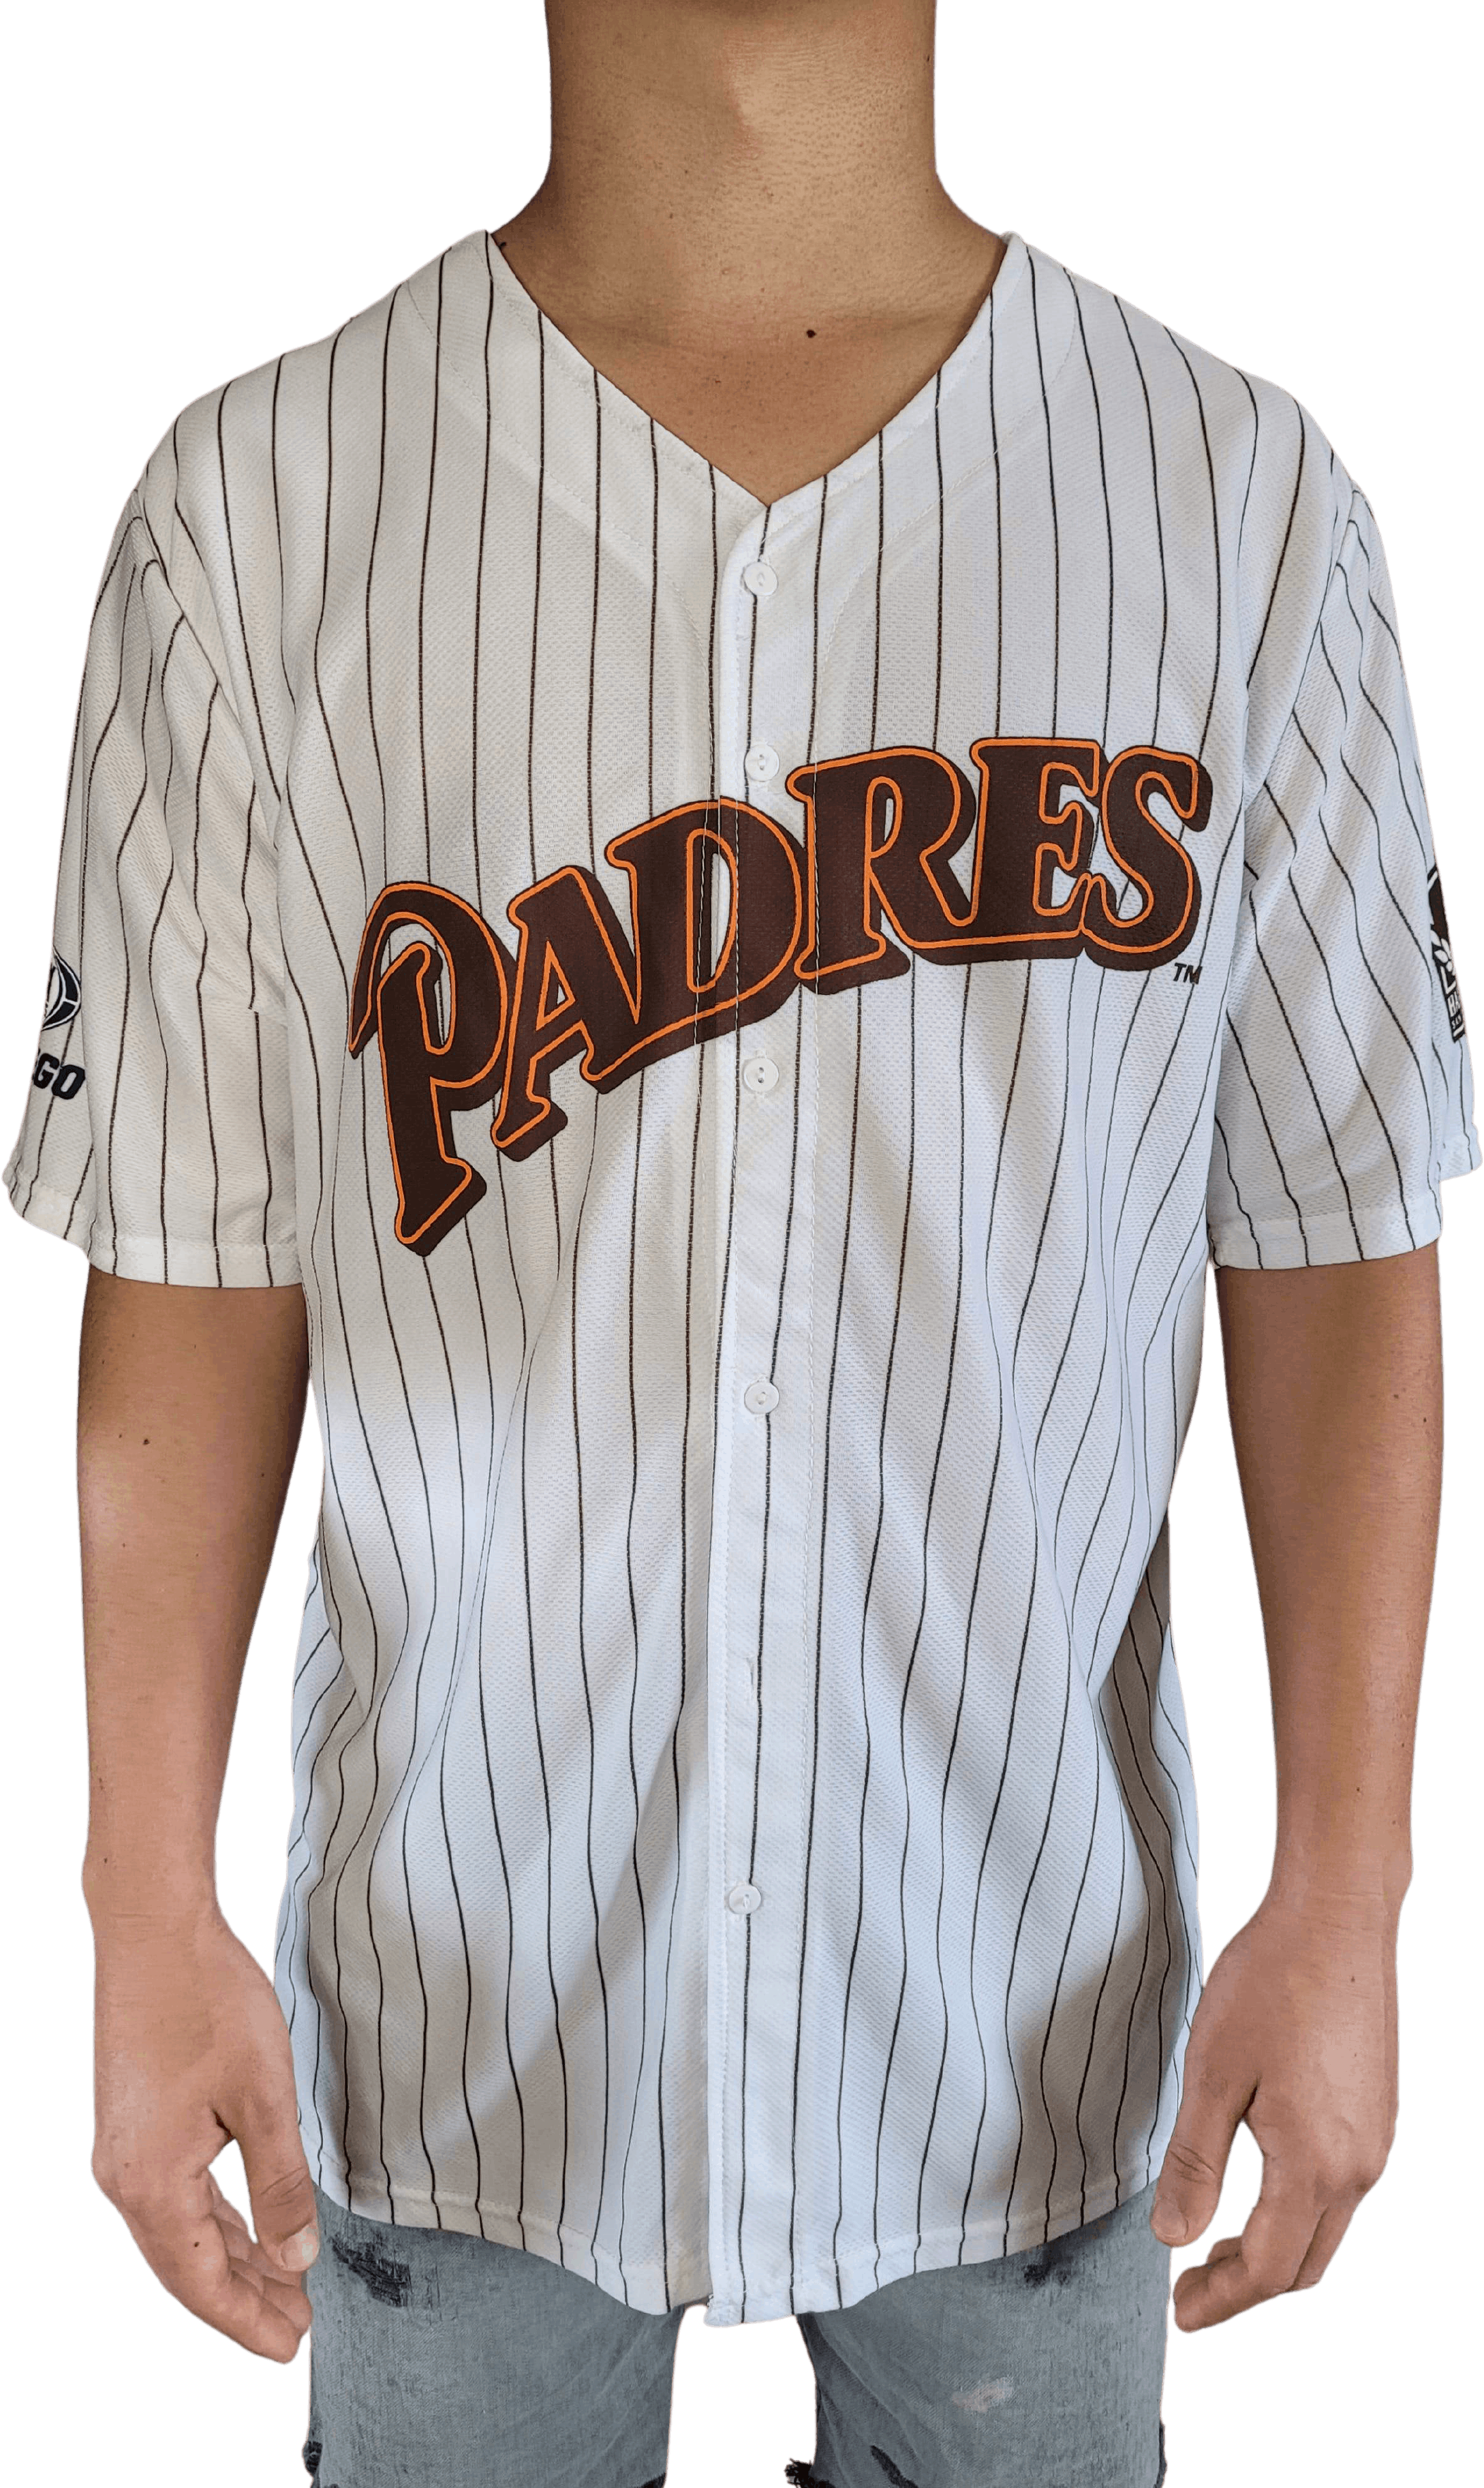 MLB White Padres Baseball Jersey for Garry Templeton #1 by Padres